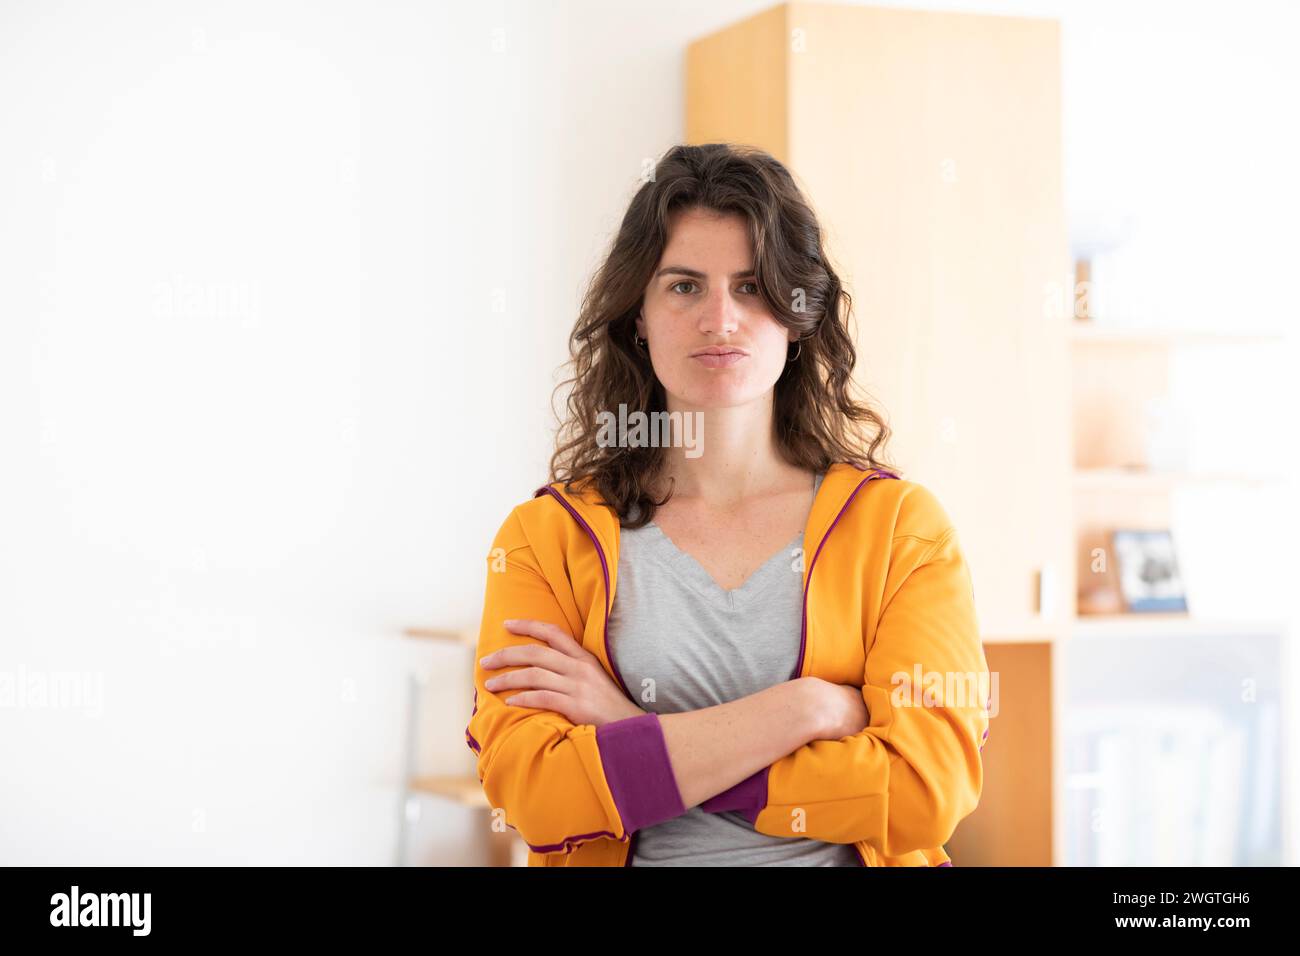 young woman with yellow jacket standing at home Stock Photo